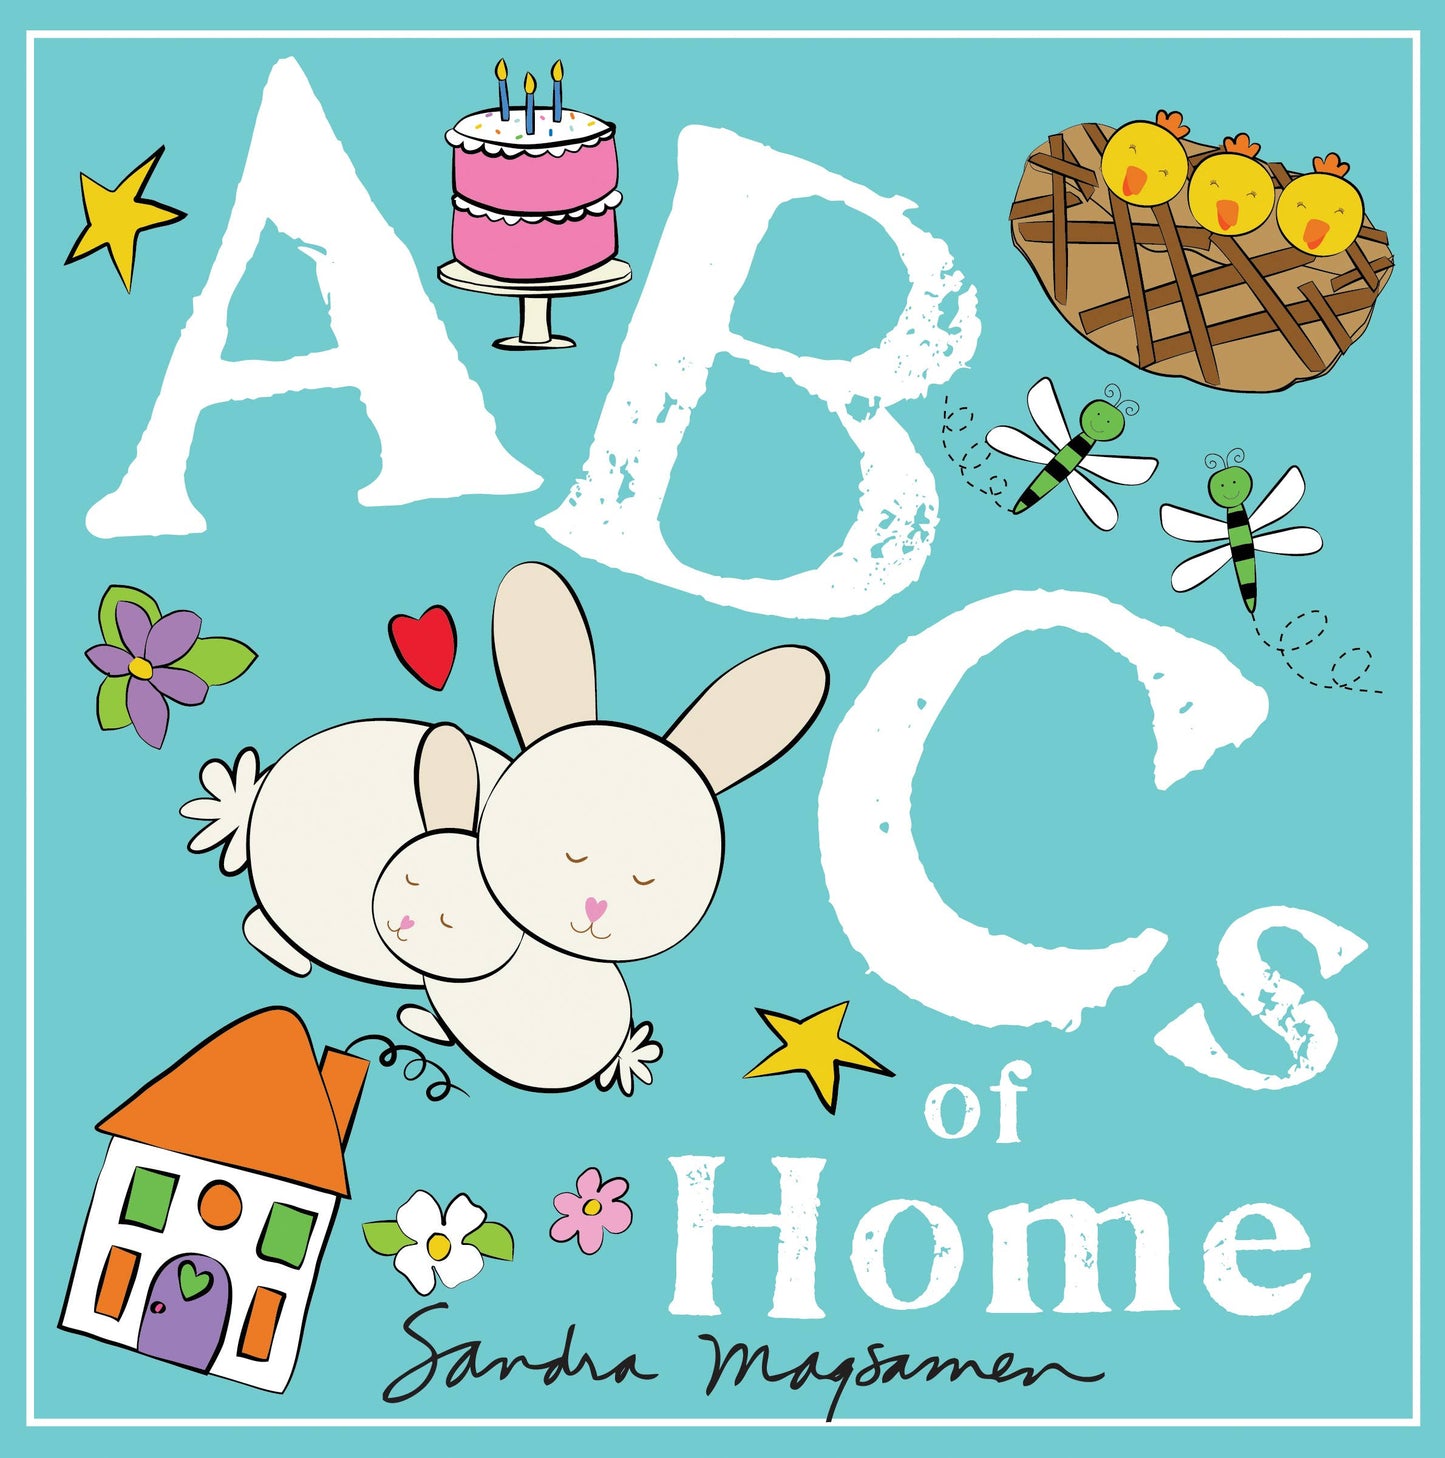 ABCs of Home (BBC)